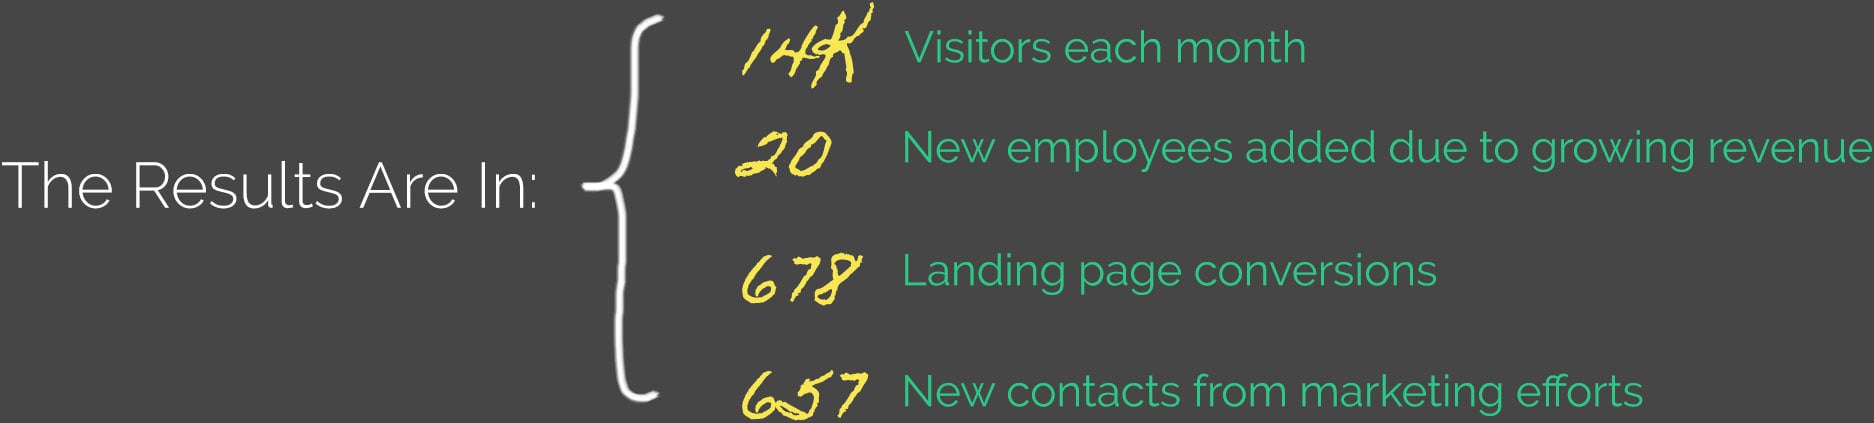 The Results Are In: 14k Visitors each month. 20 New employees added due to growing revenue. 678 Landing page conversions. 657 New contacts from marketing efforts.